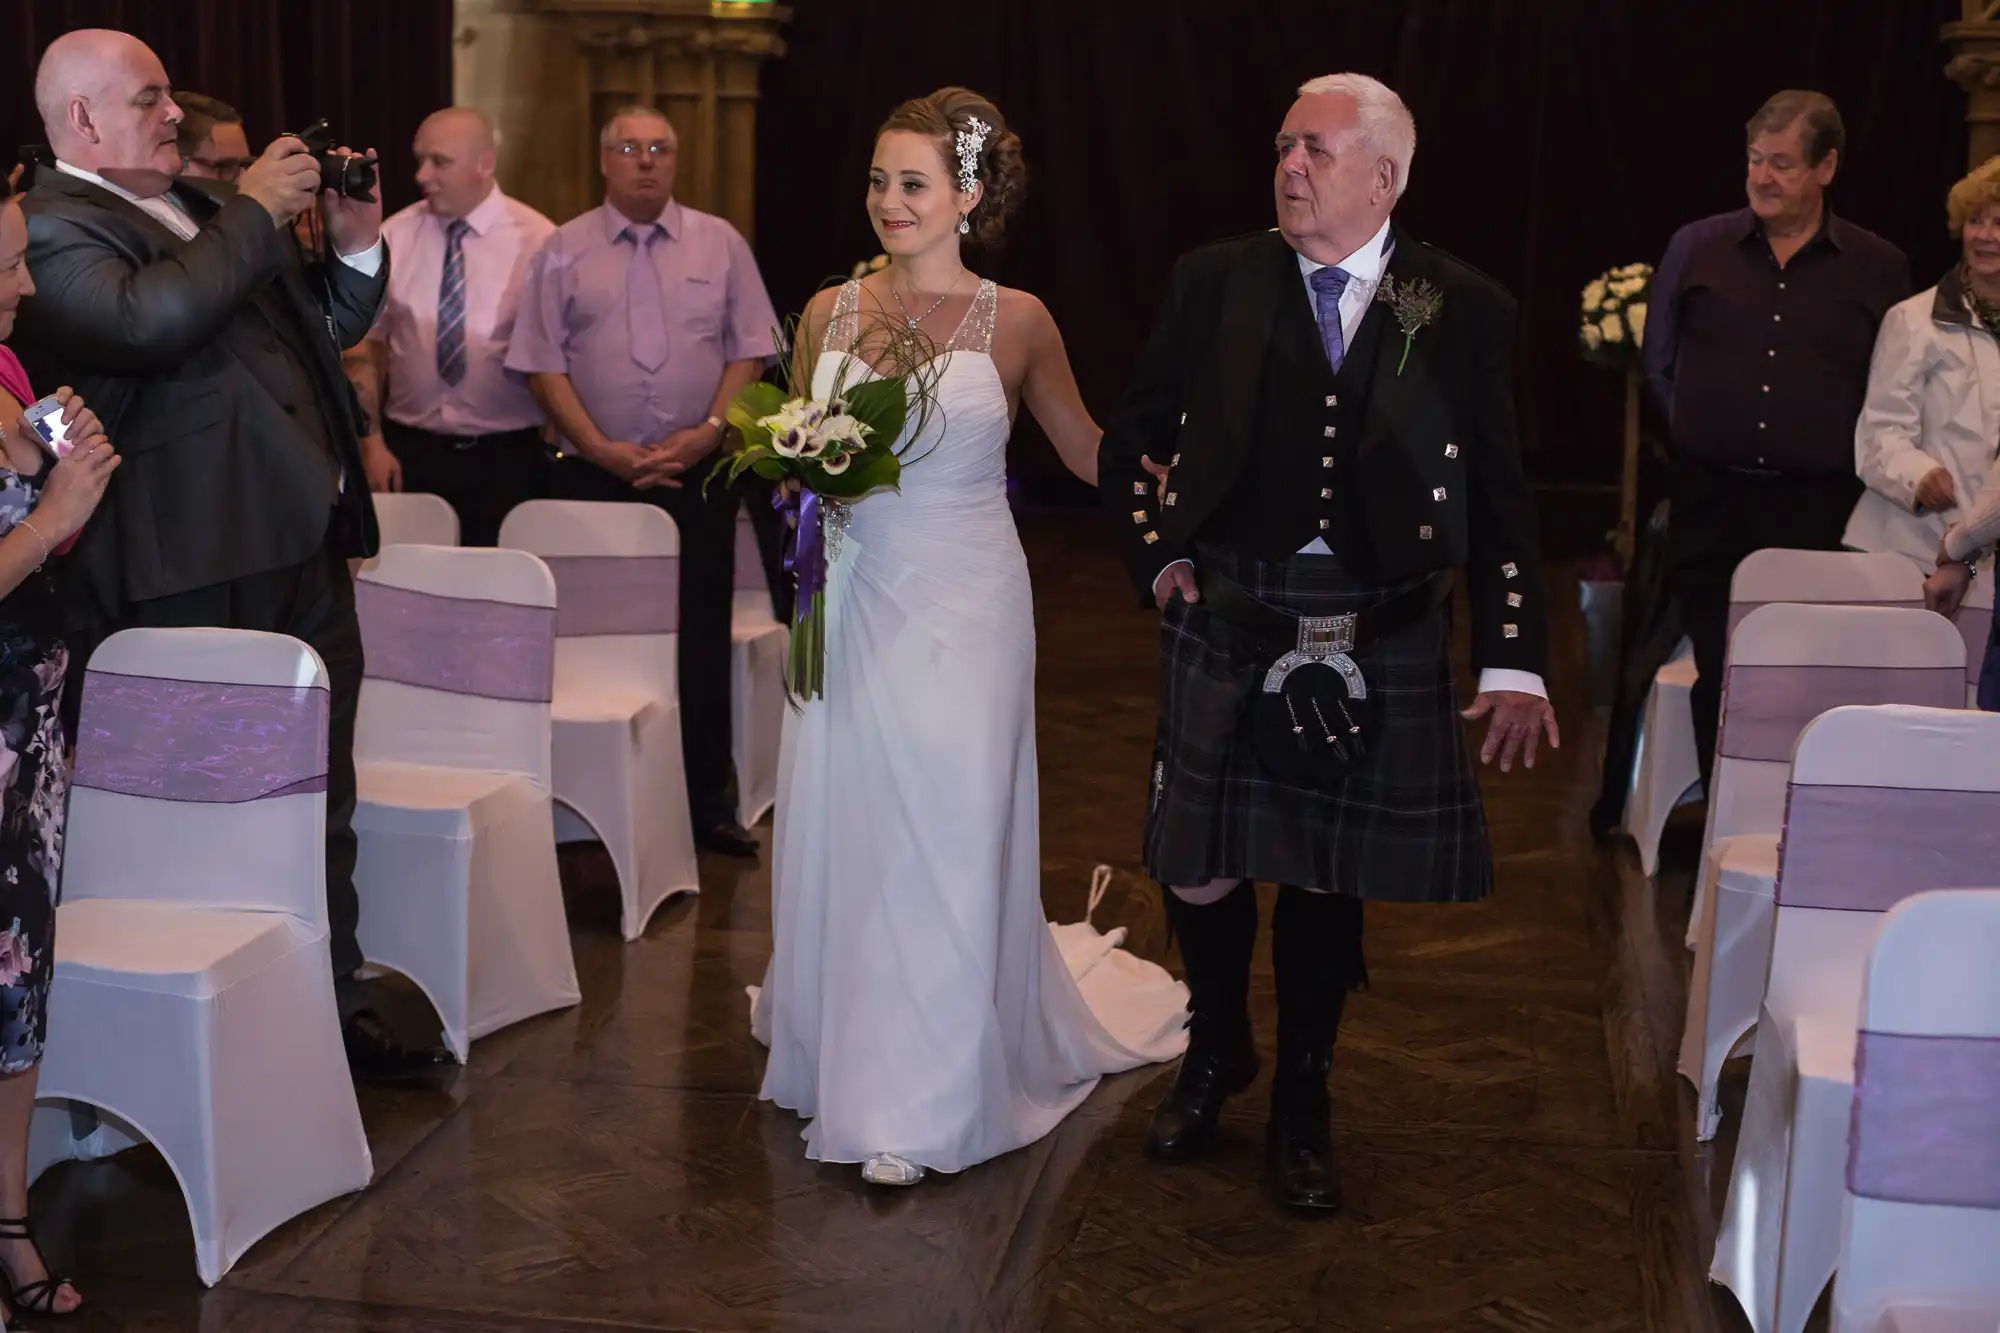 A bride in a white dress walks down the aisle with an older man in a kilt, surrounded by guests capturing the moment with cameras.